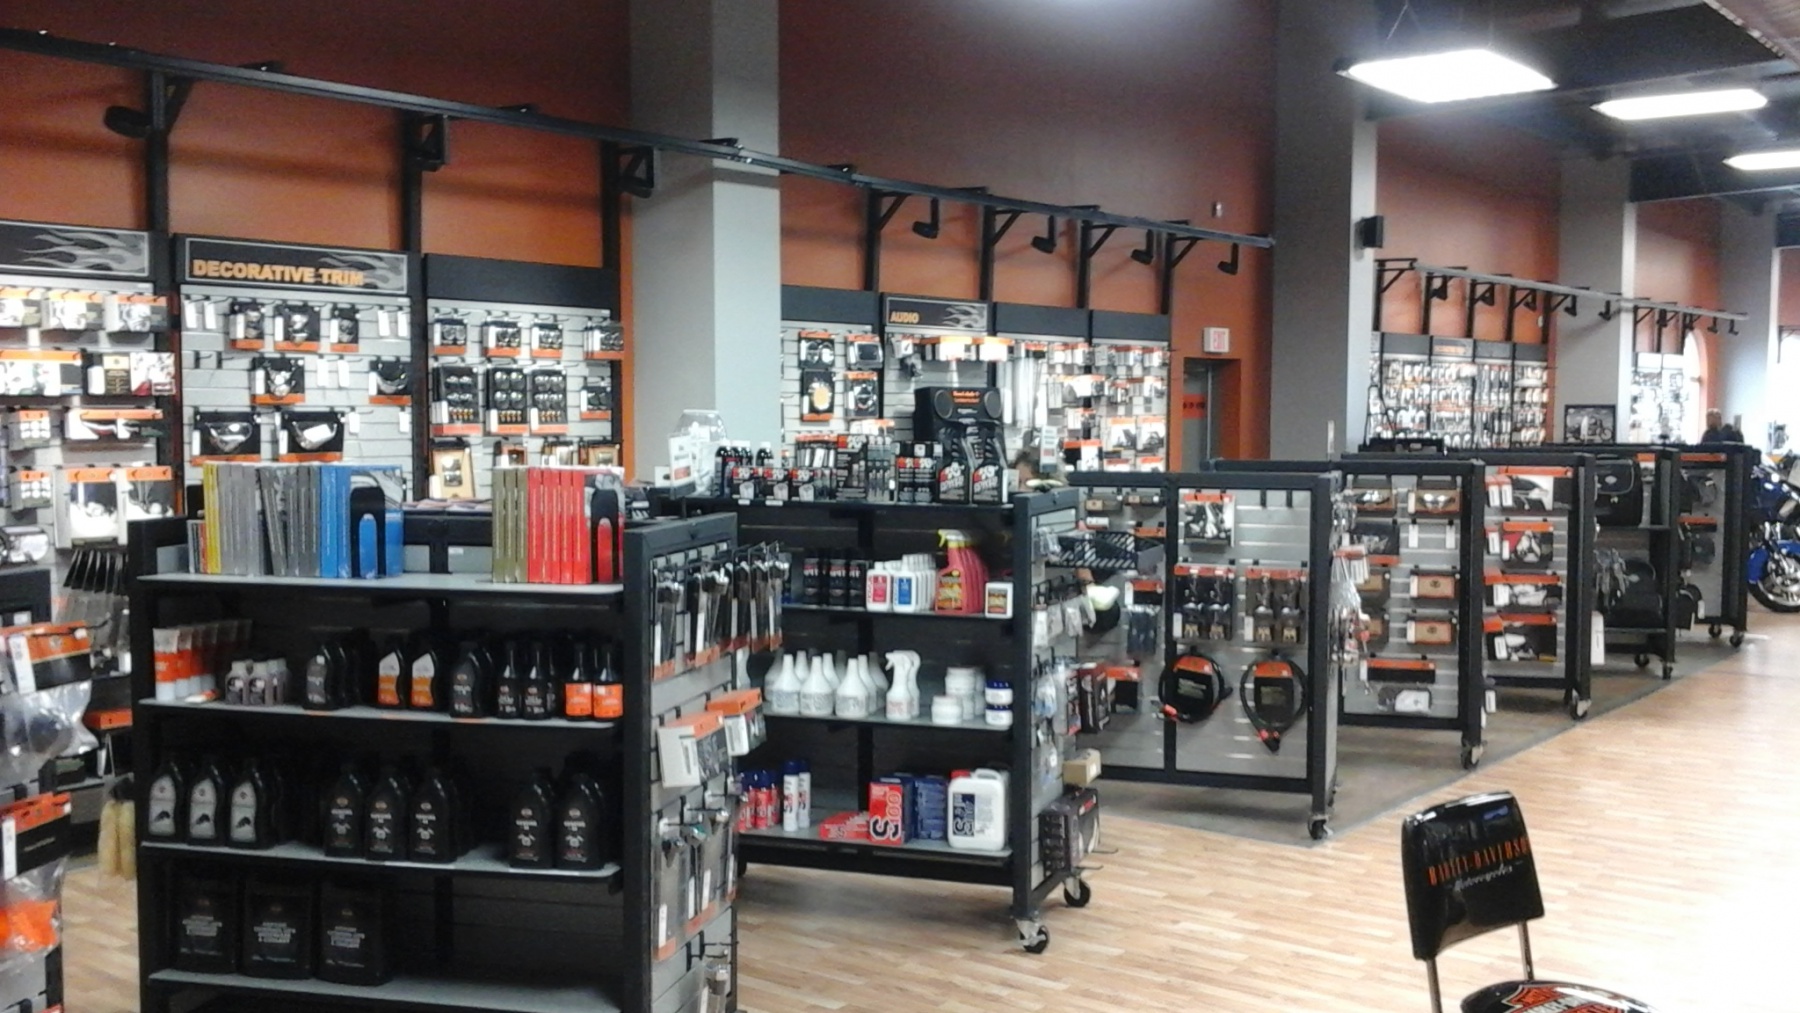 Nationwide Fixture Installations Inc Harley Davidson Case Study New Store Installation Millwork Packages Retail Rollouts Maintenance Program Management Signage Custom Installation Services